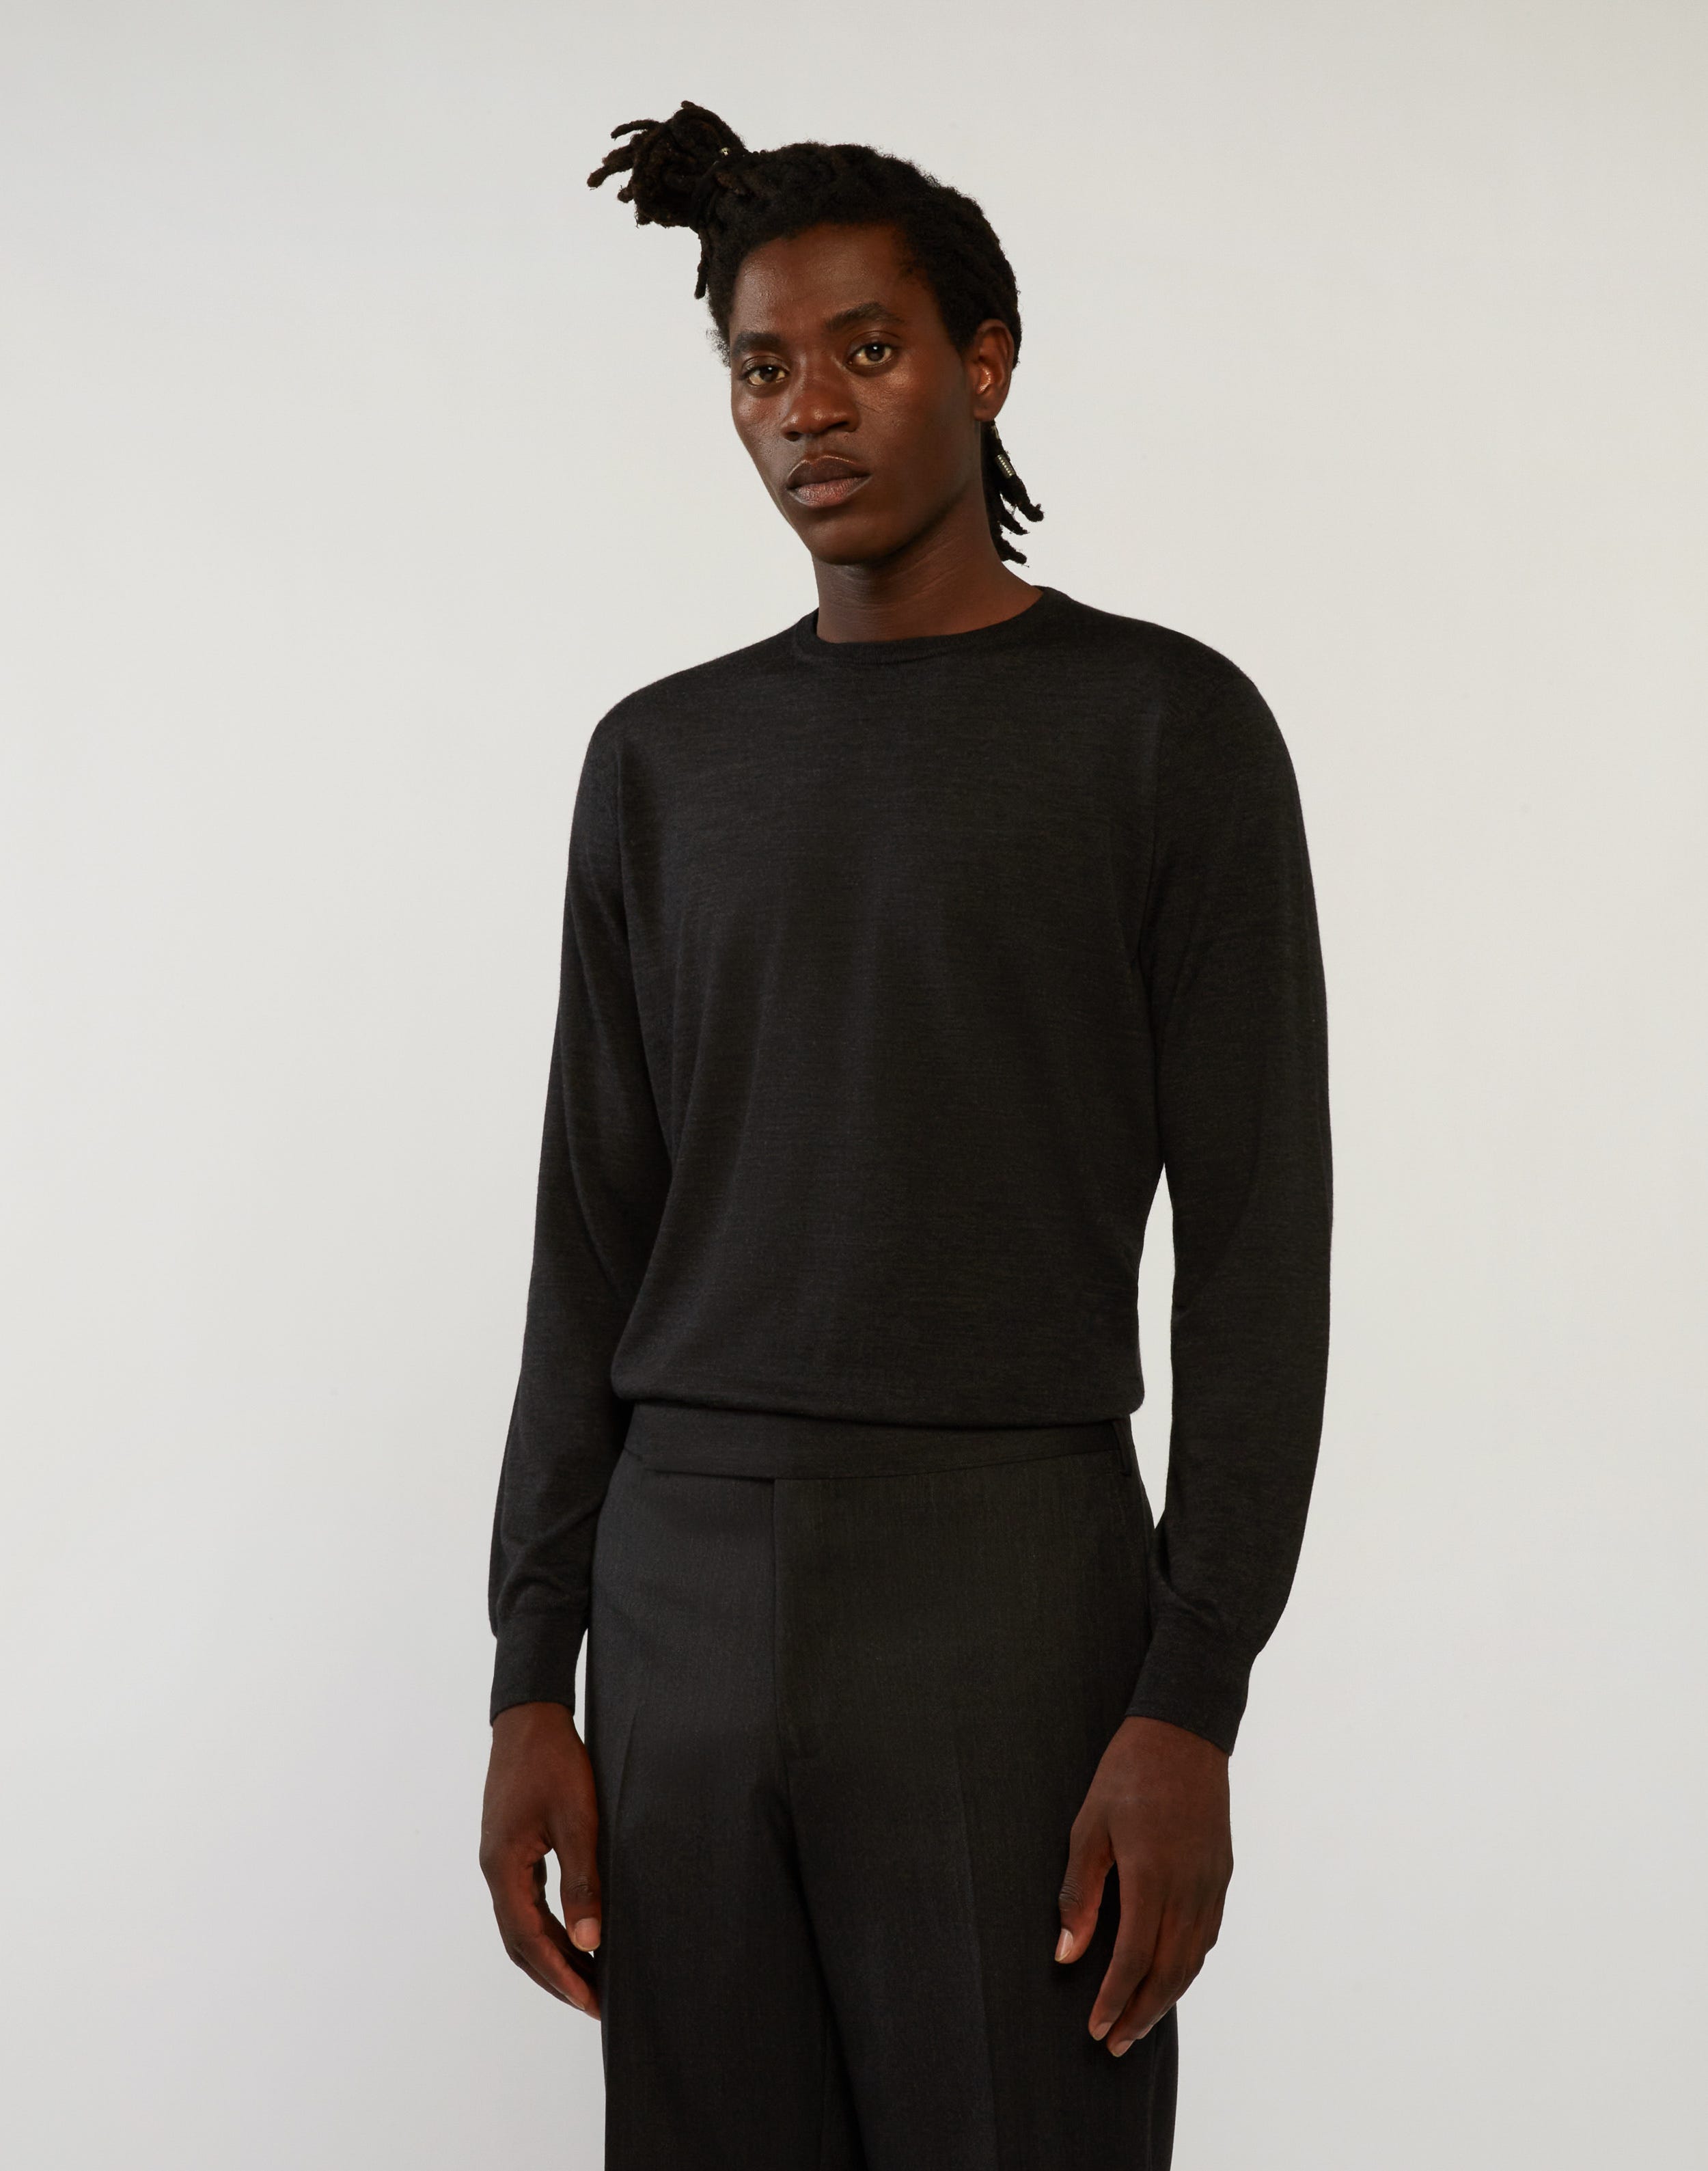 Grey round-neck knit in wool, silk and cashmere 